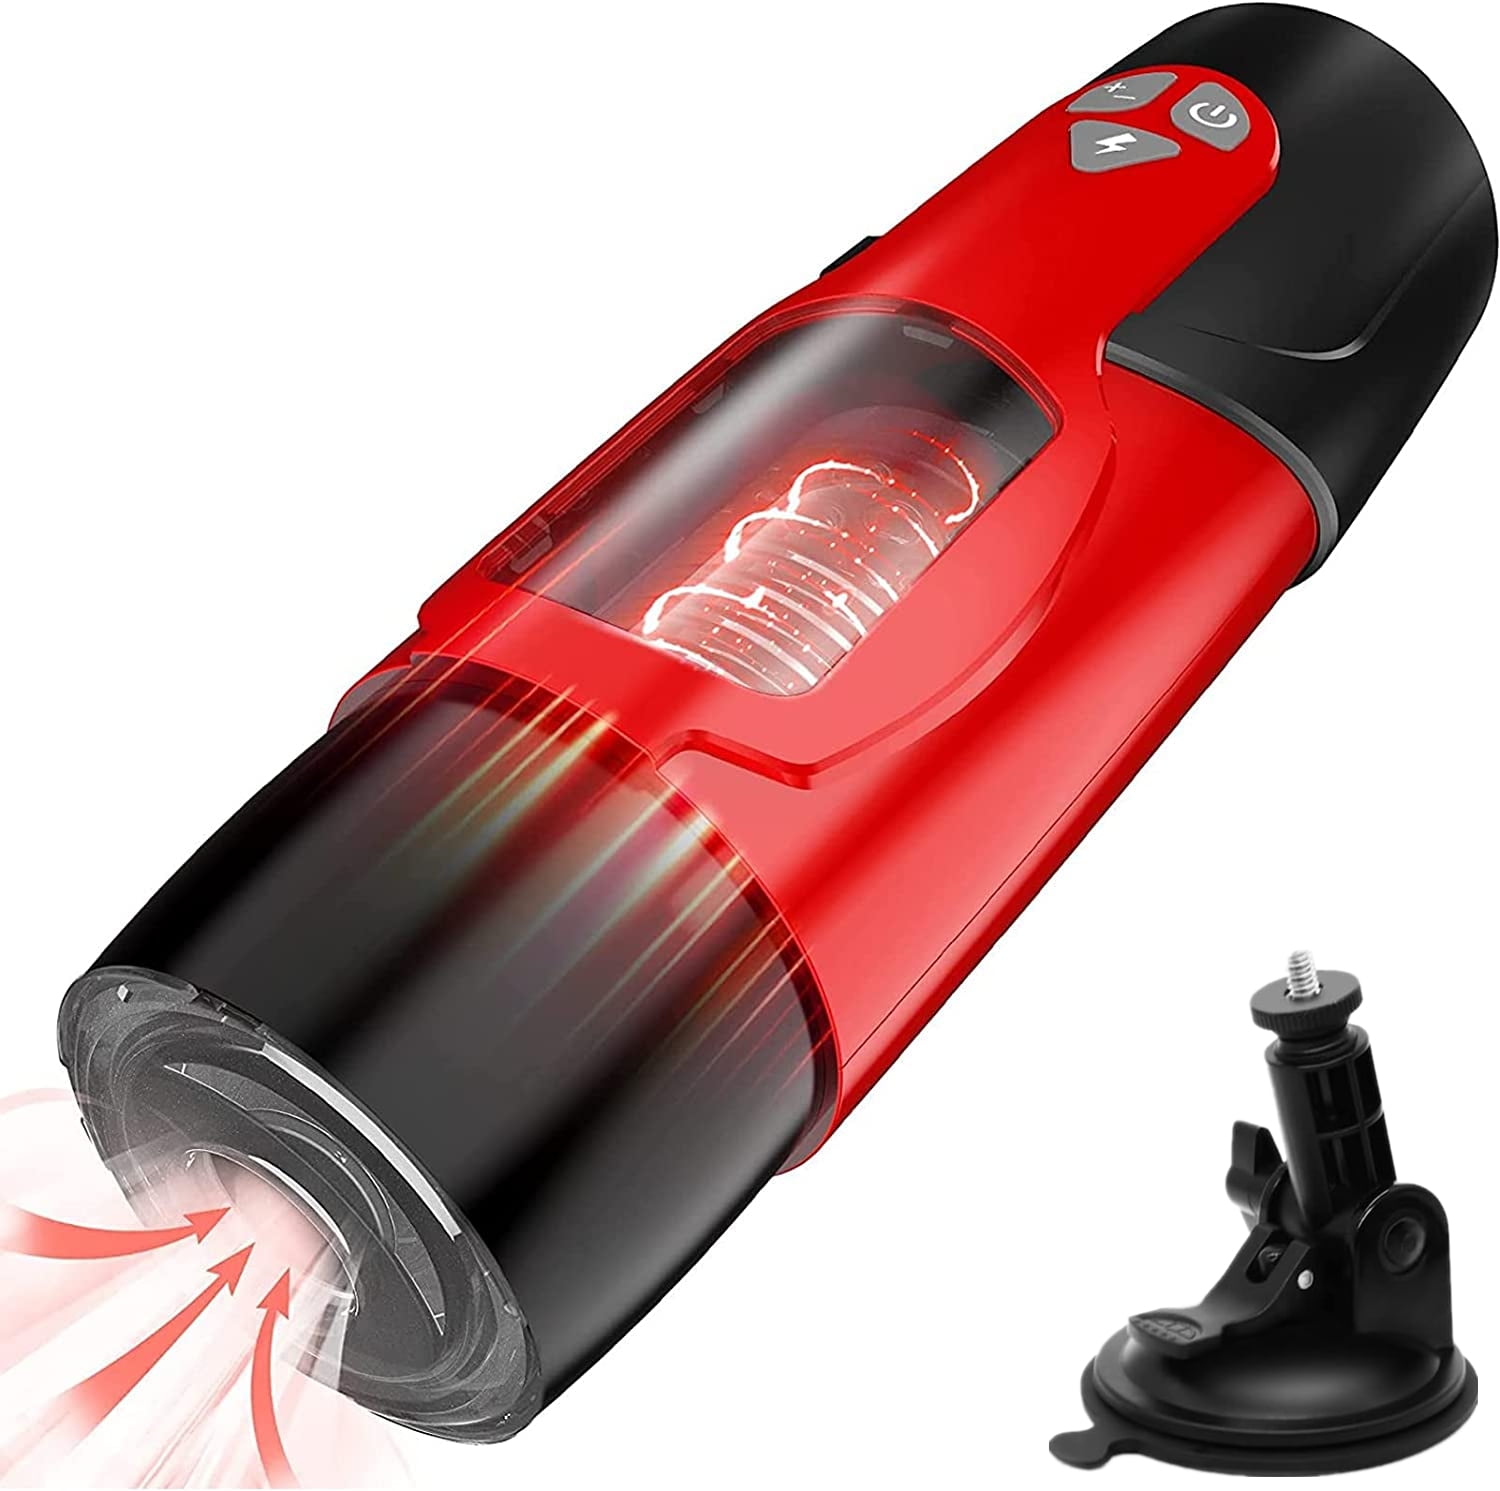 Automatic Male Masturbator Cup with 7 Powerful Thrusting Rotating Modes for Penis Stimulation, Adult Electric Pocket Stroker Male Sex Toys for image